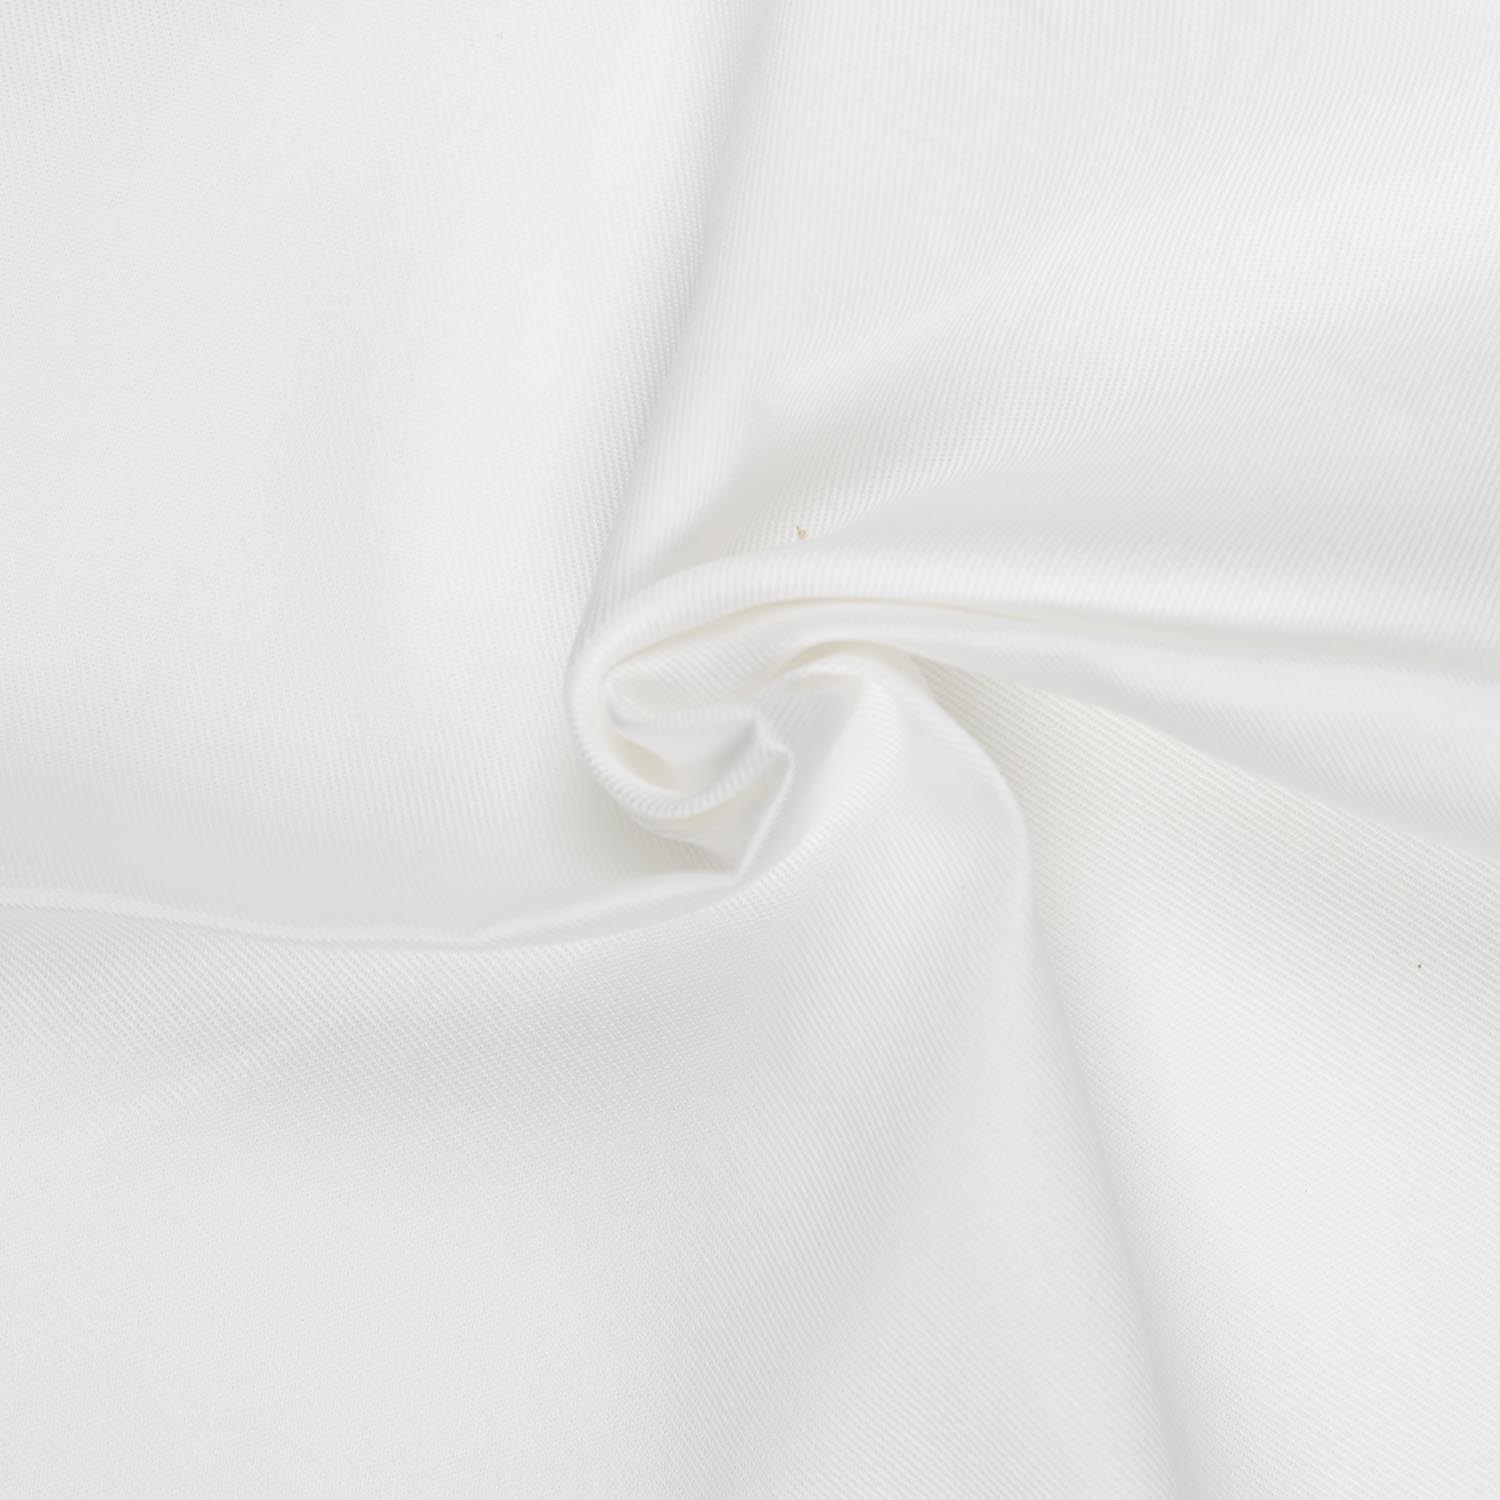 6.2 oz. 92/8 Polyester Spandex Jersey Fabric - TVF